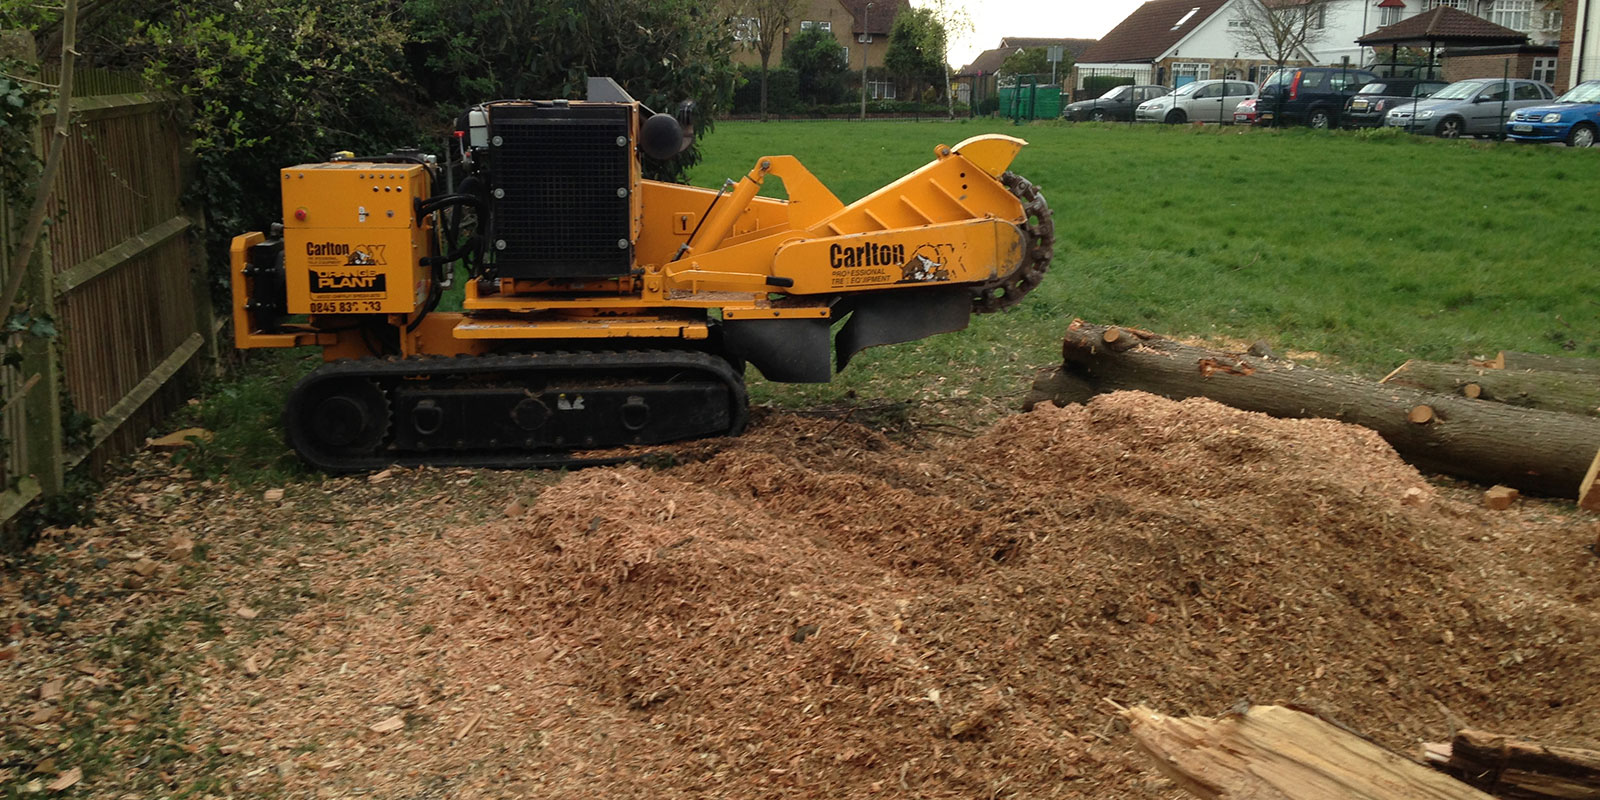 Stump Grinding Experts in Esher Surrey